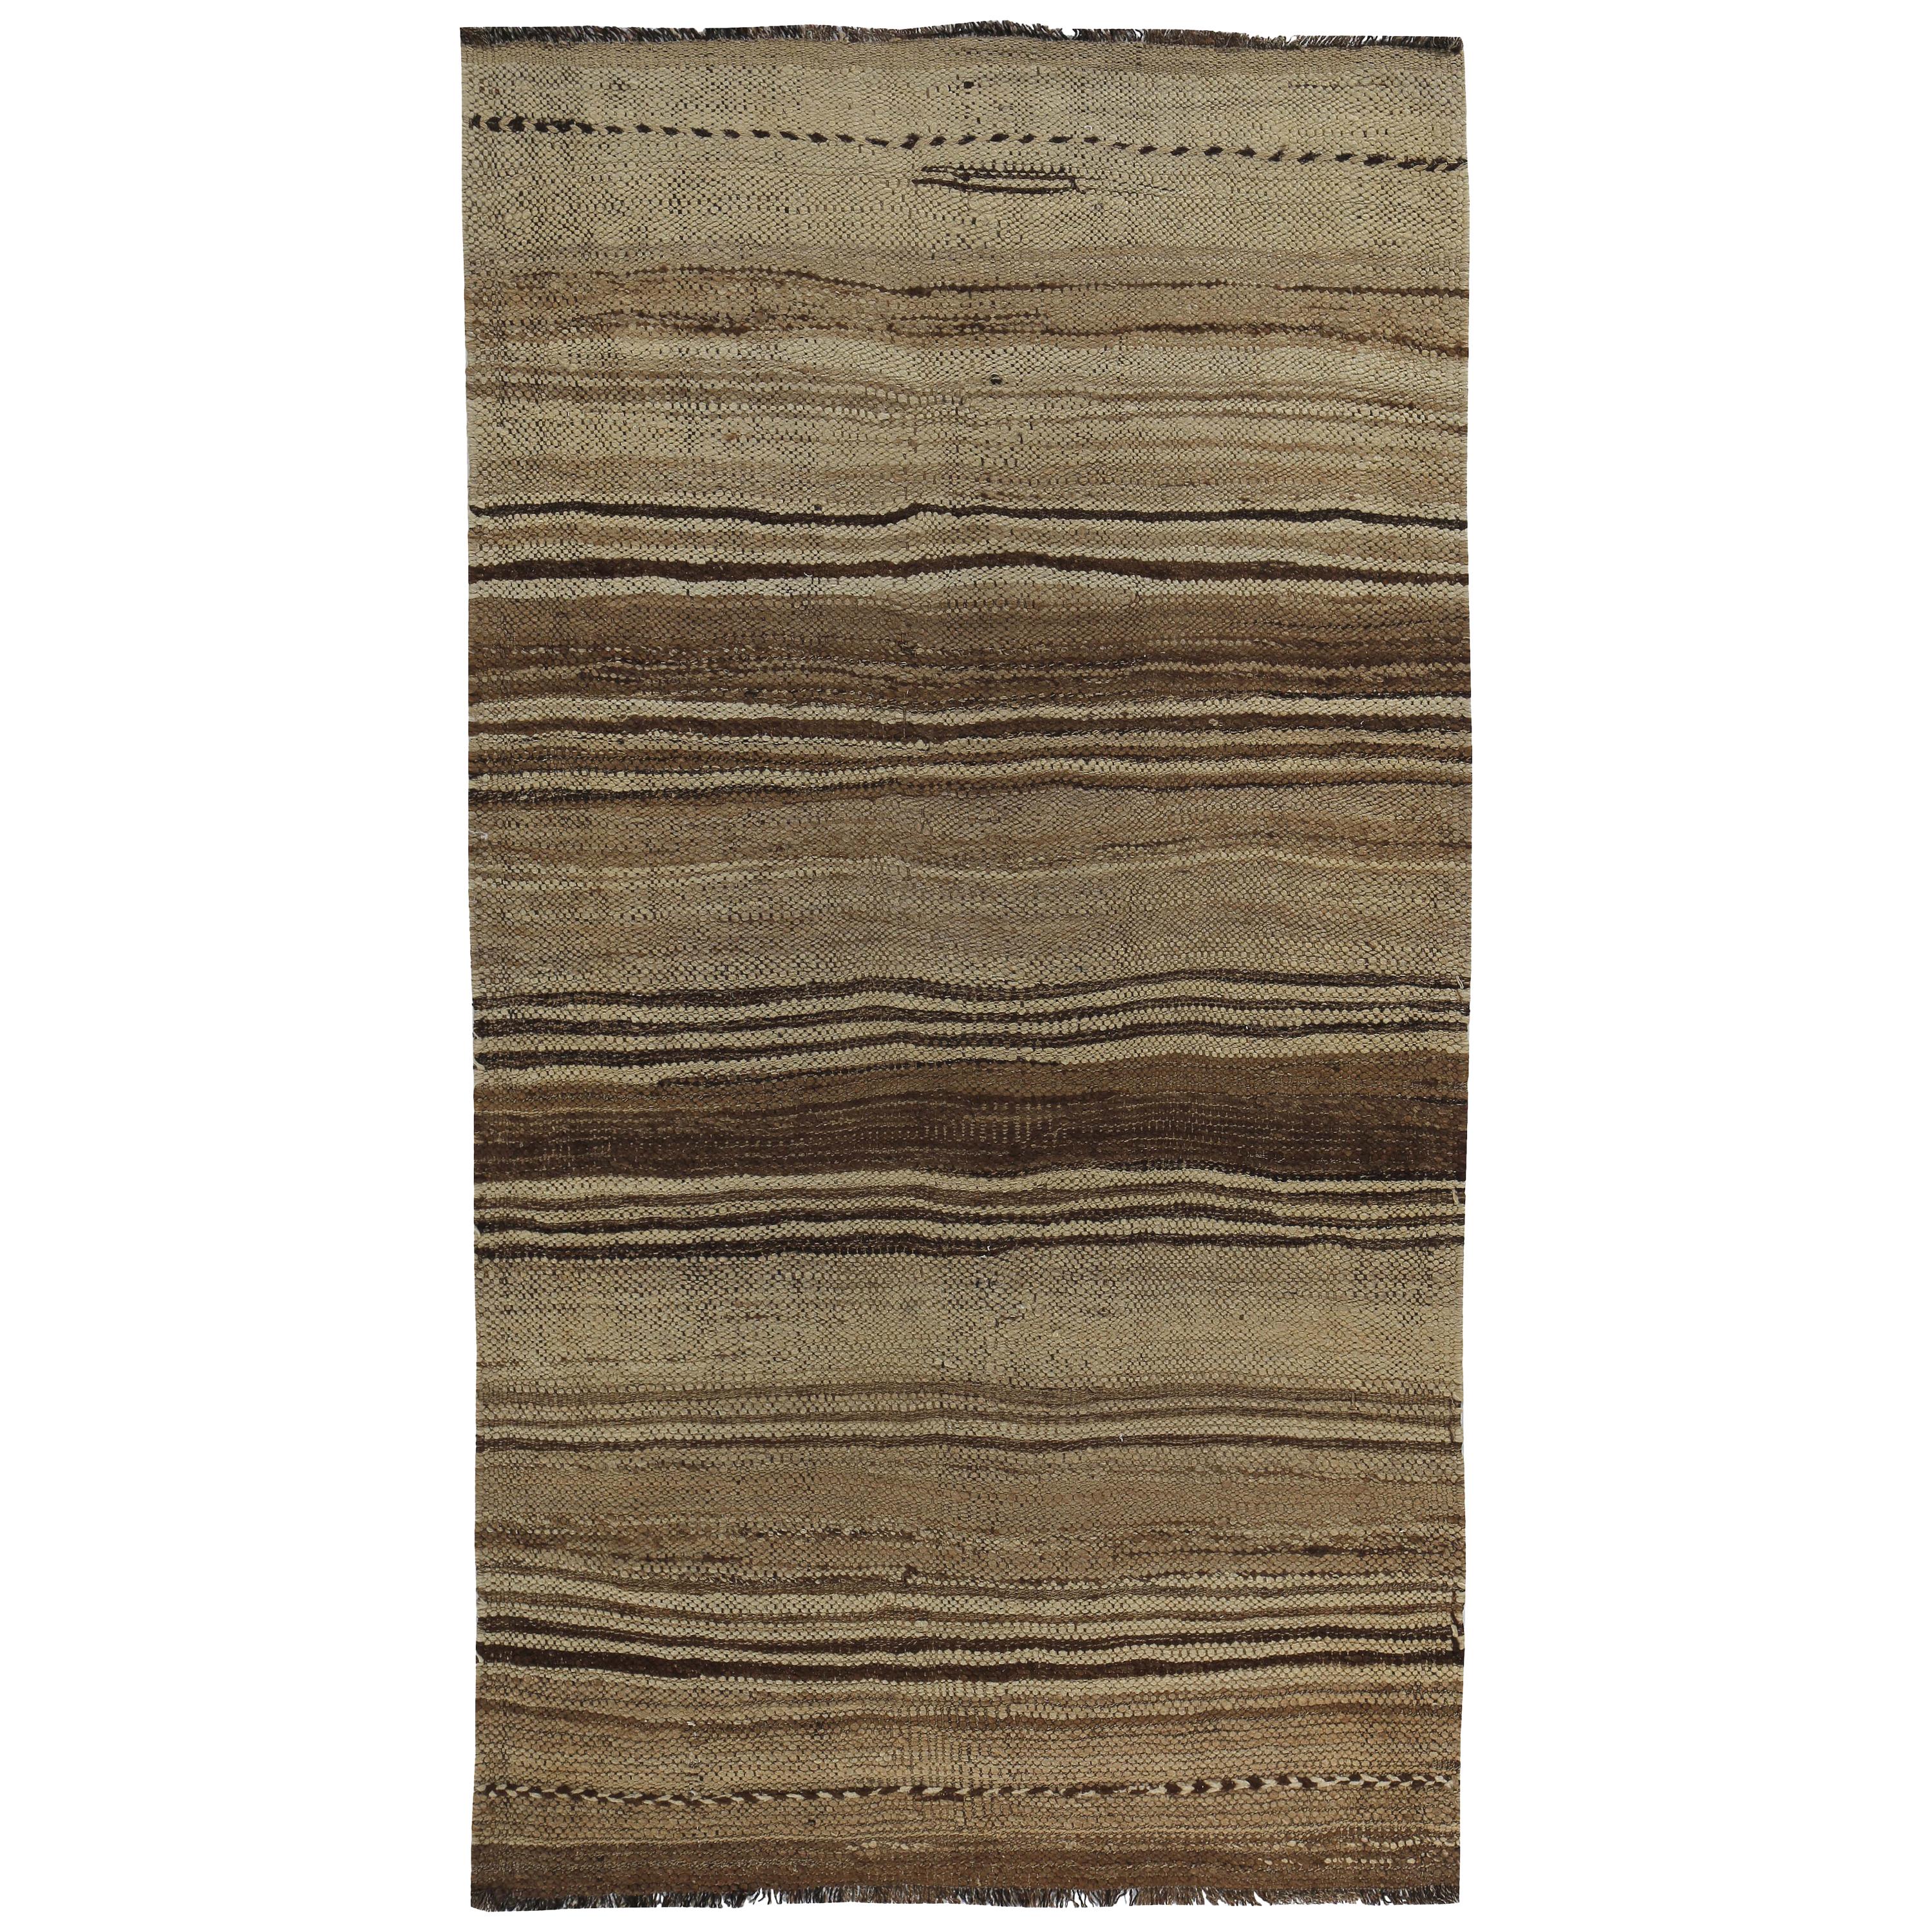 Turkish Kilim Rug with Brown Tribal Stripes on Ivory Field For Sale